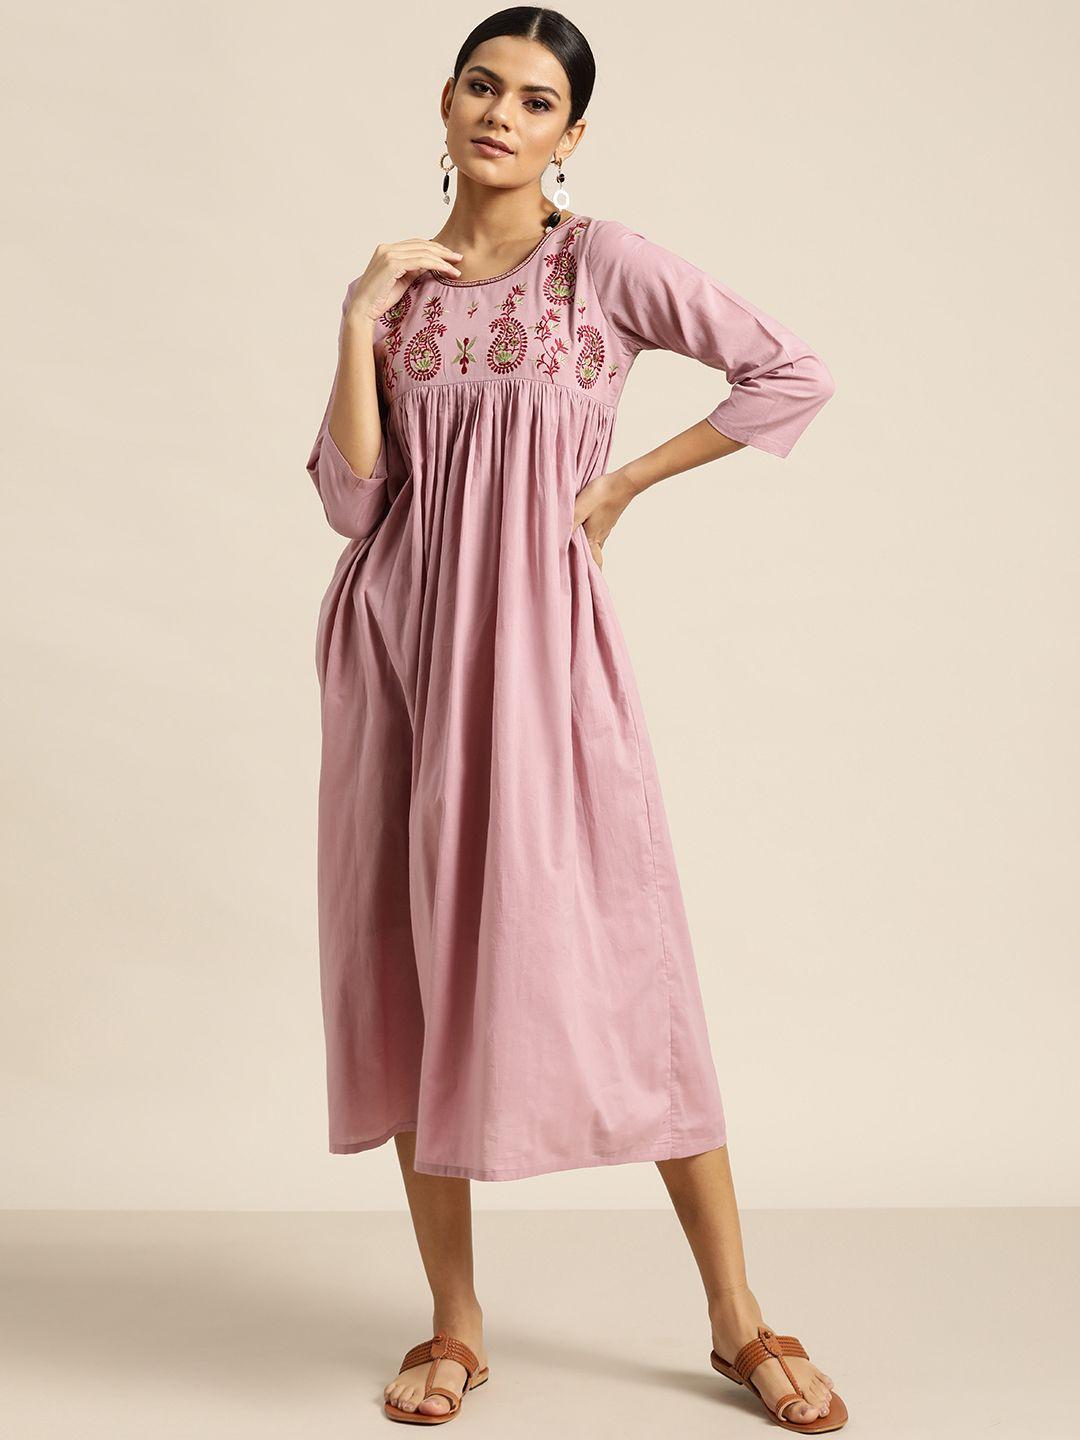 shae by sassafras mauve & red embroidered pure cotton ethnic empire midi dress